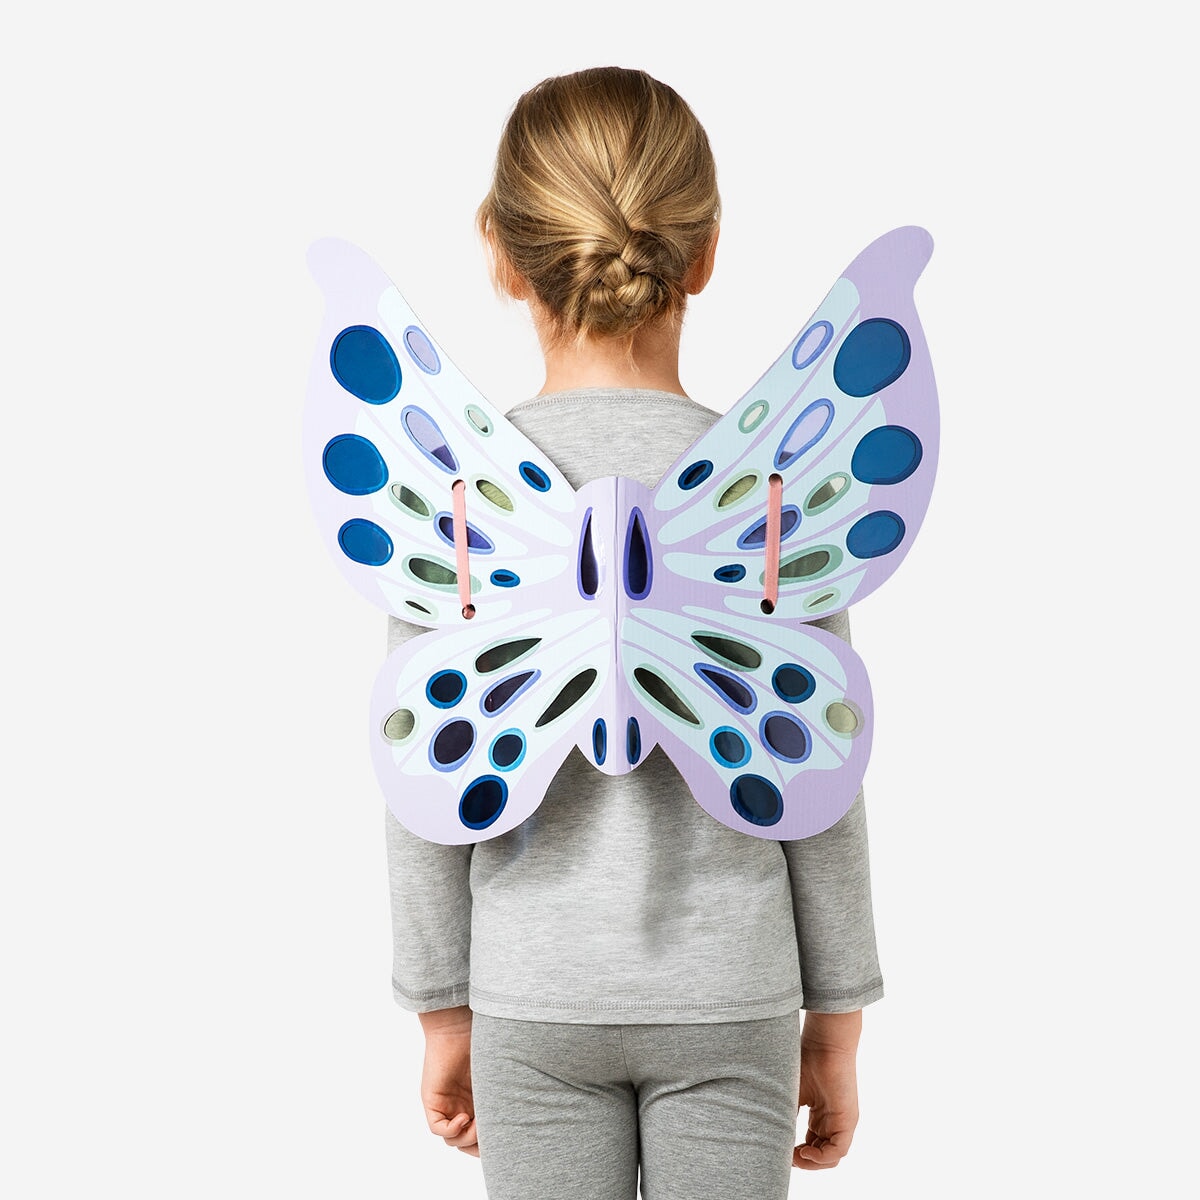 Make-your-own butterfly wings Hobby Flying Tiger Copenhagen 